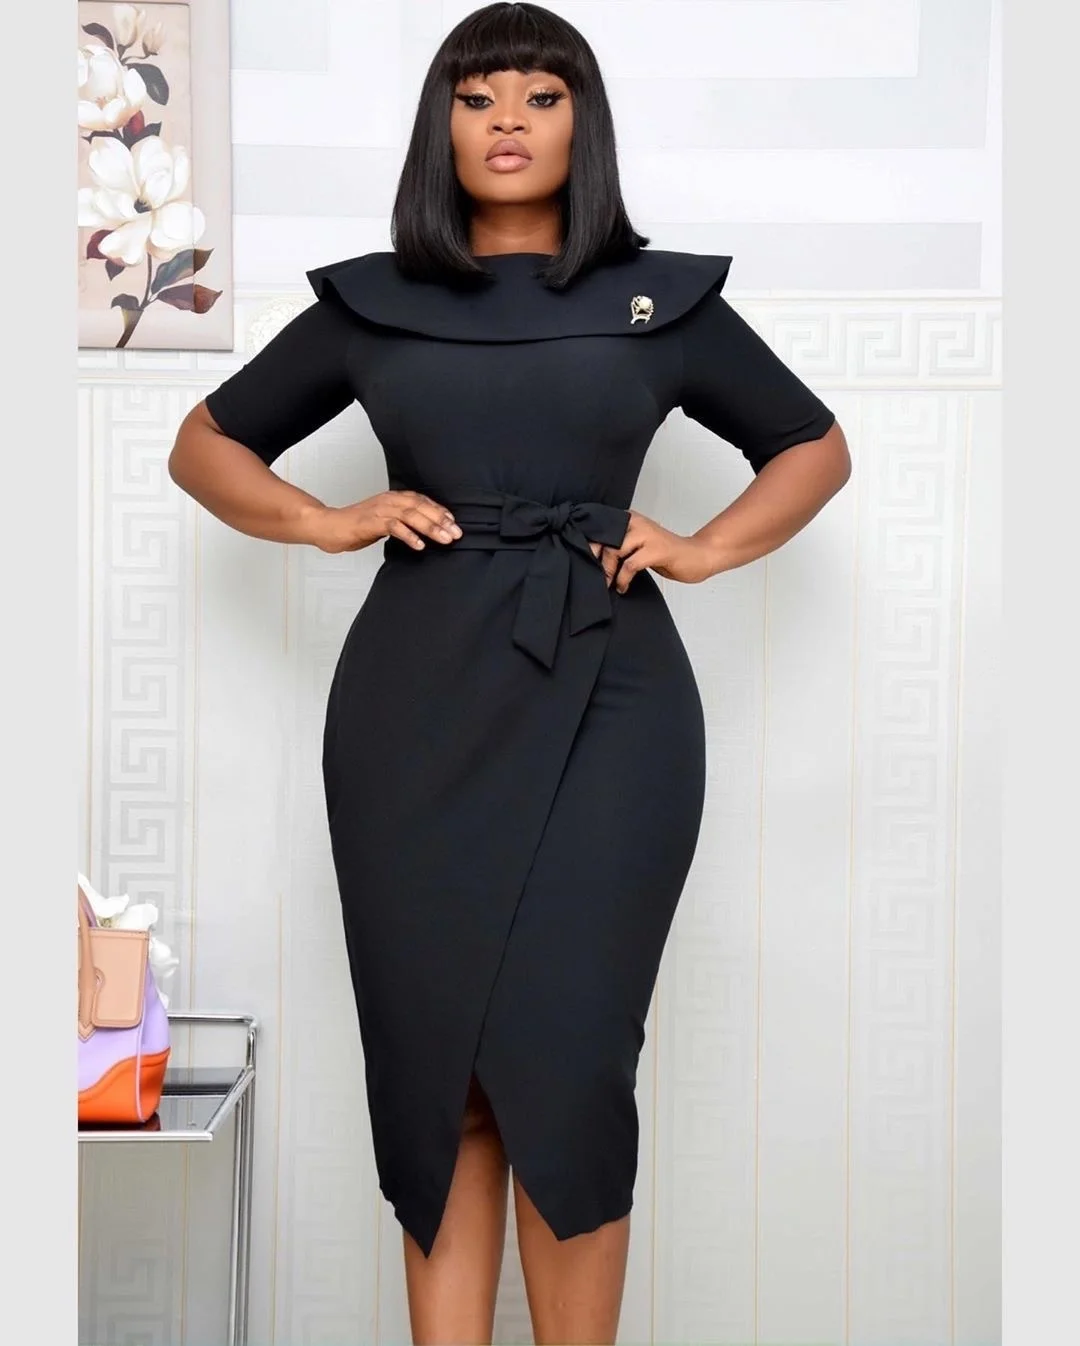 Women's 2023 New Style Solid Color Office Lady Dress Short Sleeve With Belted Slim Fit Bodycon Casual Midi Dress Femme Vestidos